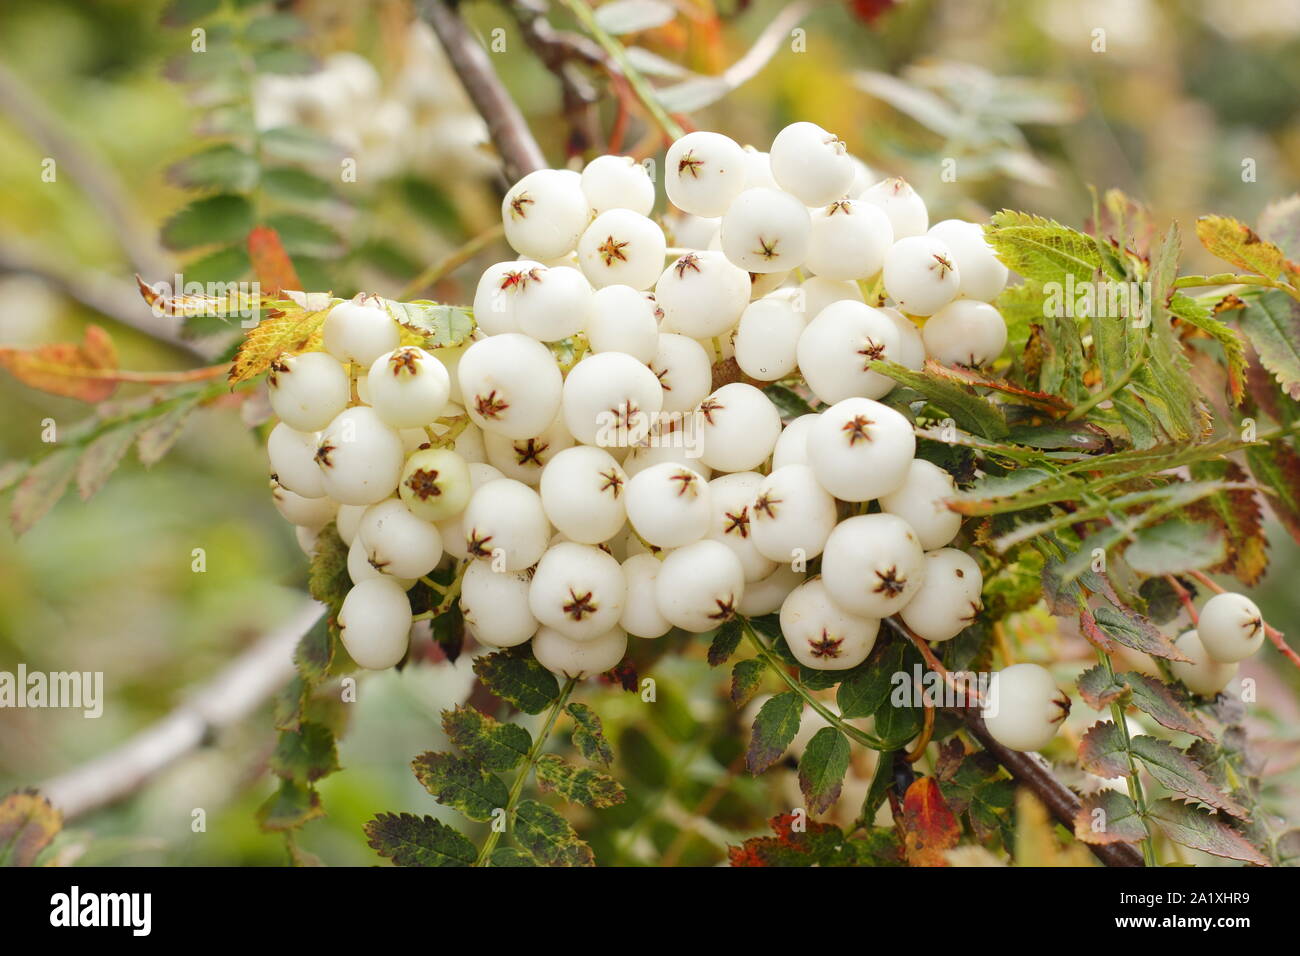 White berries Stock Photos, Royalty Free White berries Images